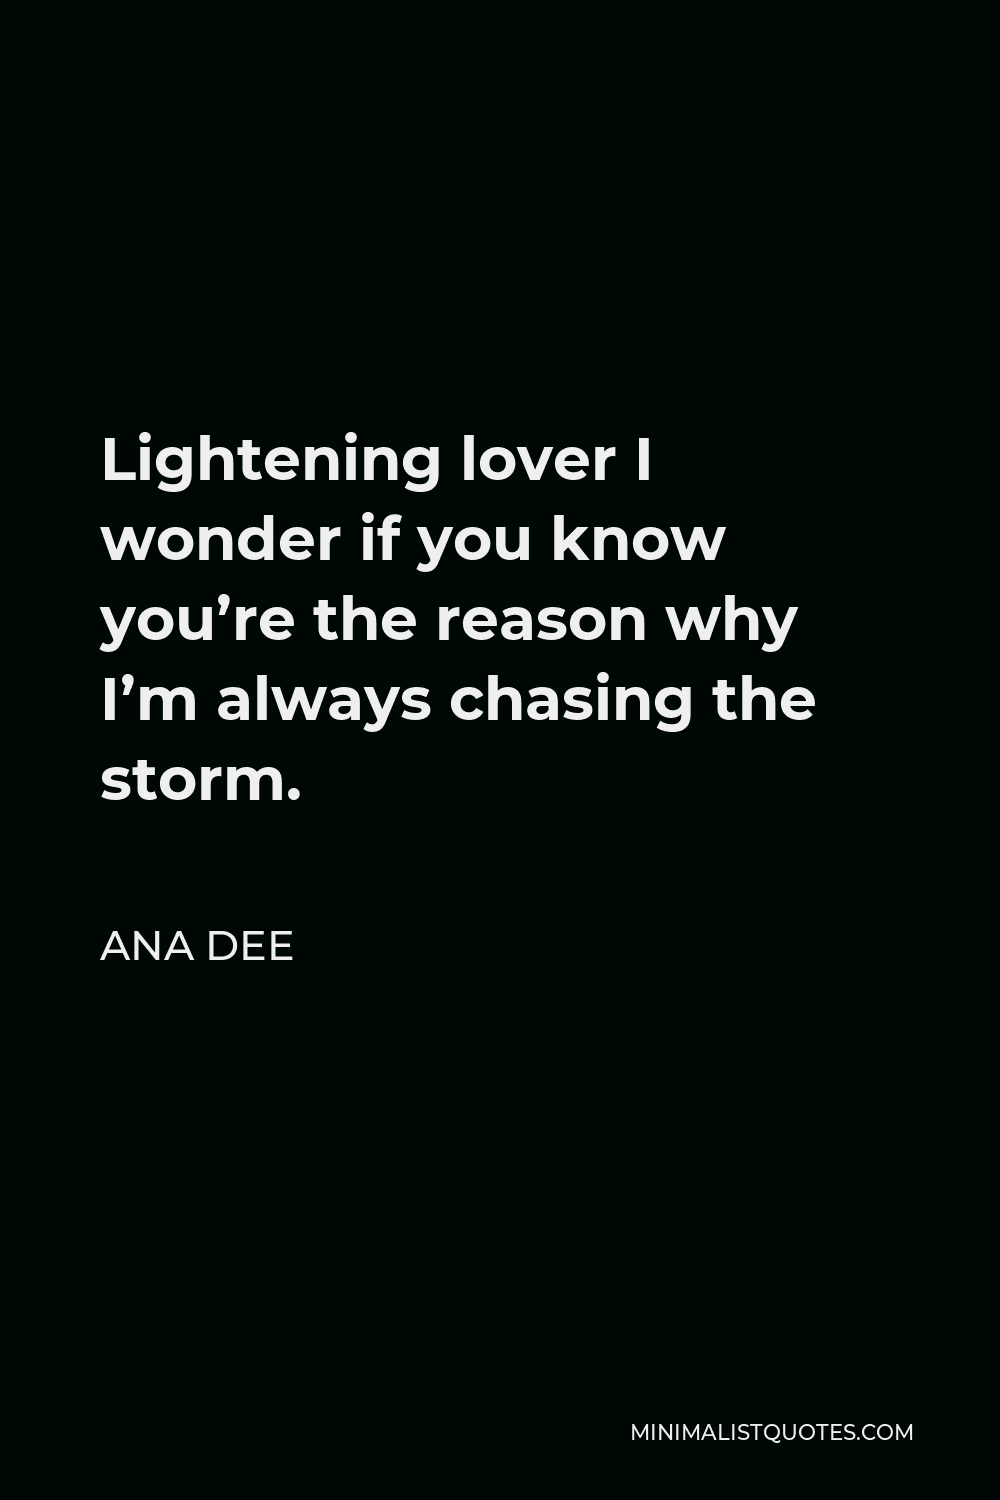 Ana Dee Quote - Lightening lover I wonder if you know you’re the reason why I’m always chasing the storm.